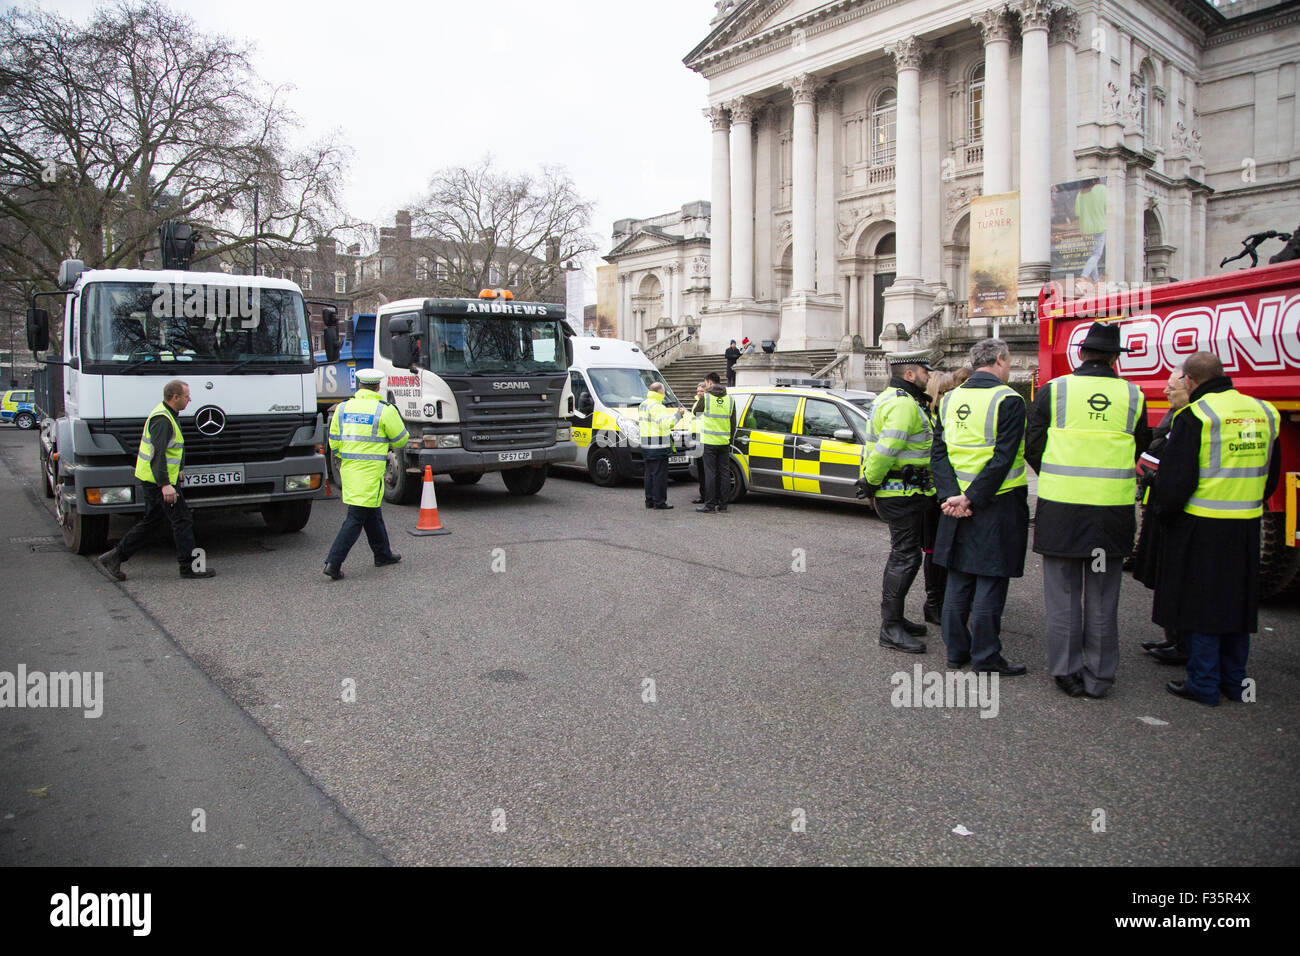 Transport for London's HGV Task Force set up a check point to ensure that Heavy Goods Vehicle's in London conform to safety requ Stock Photo